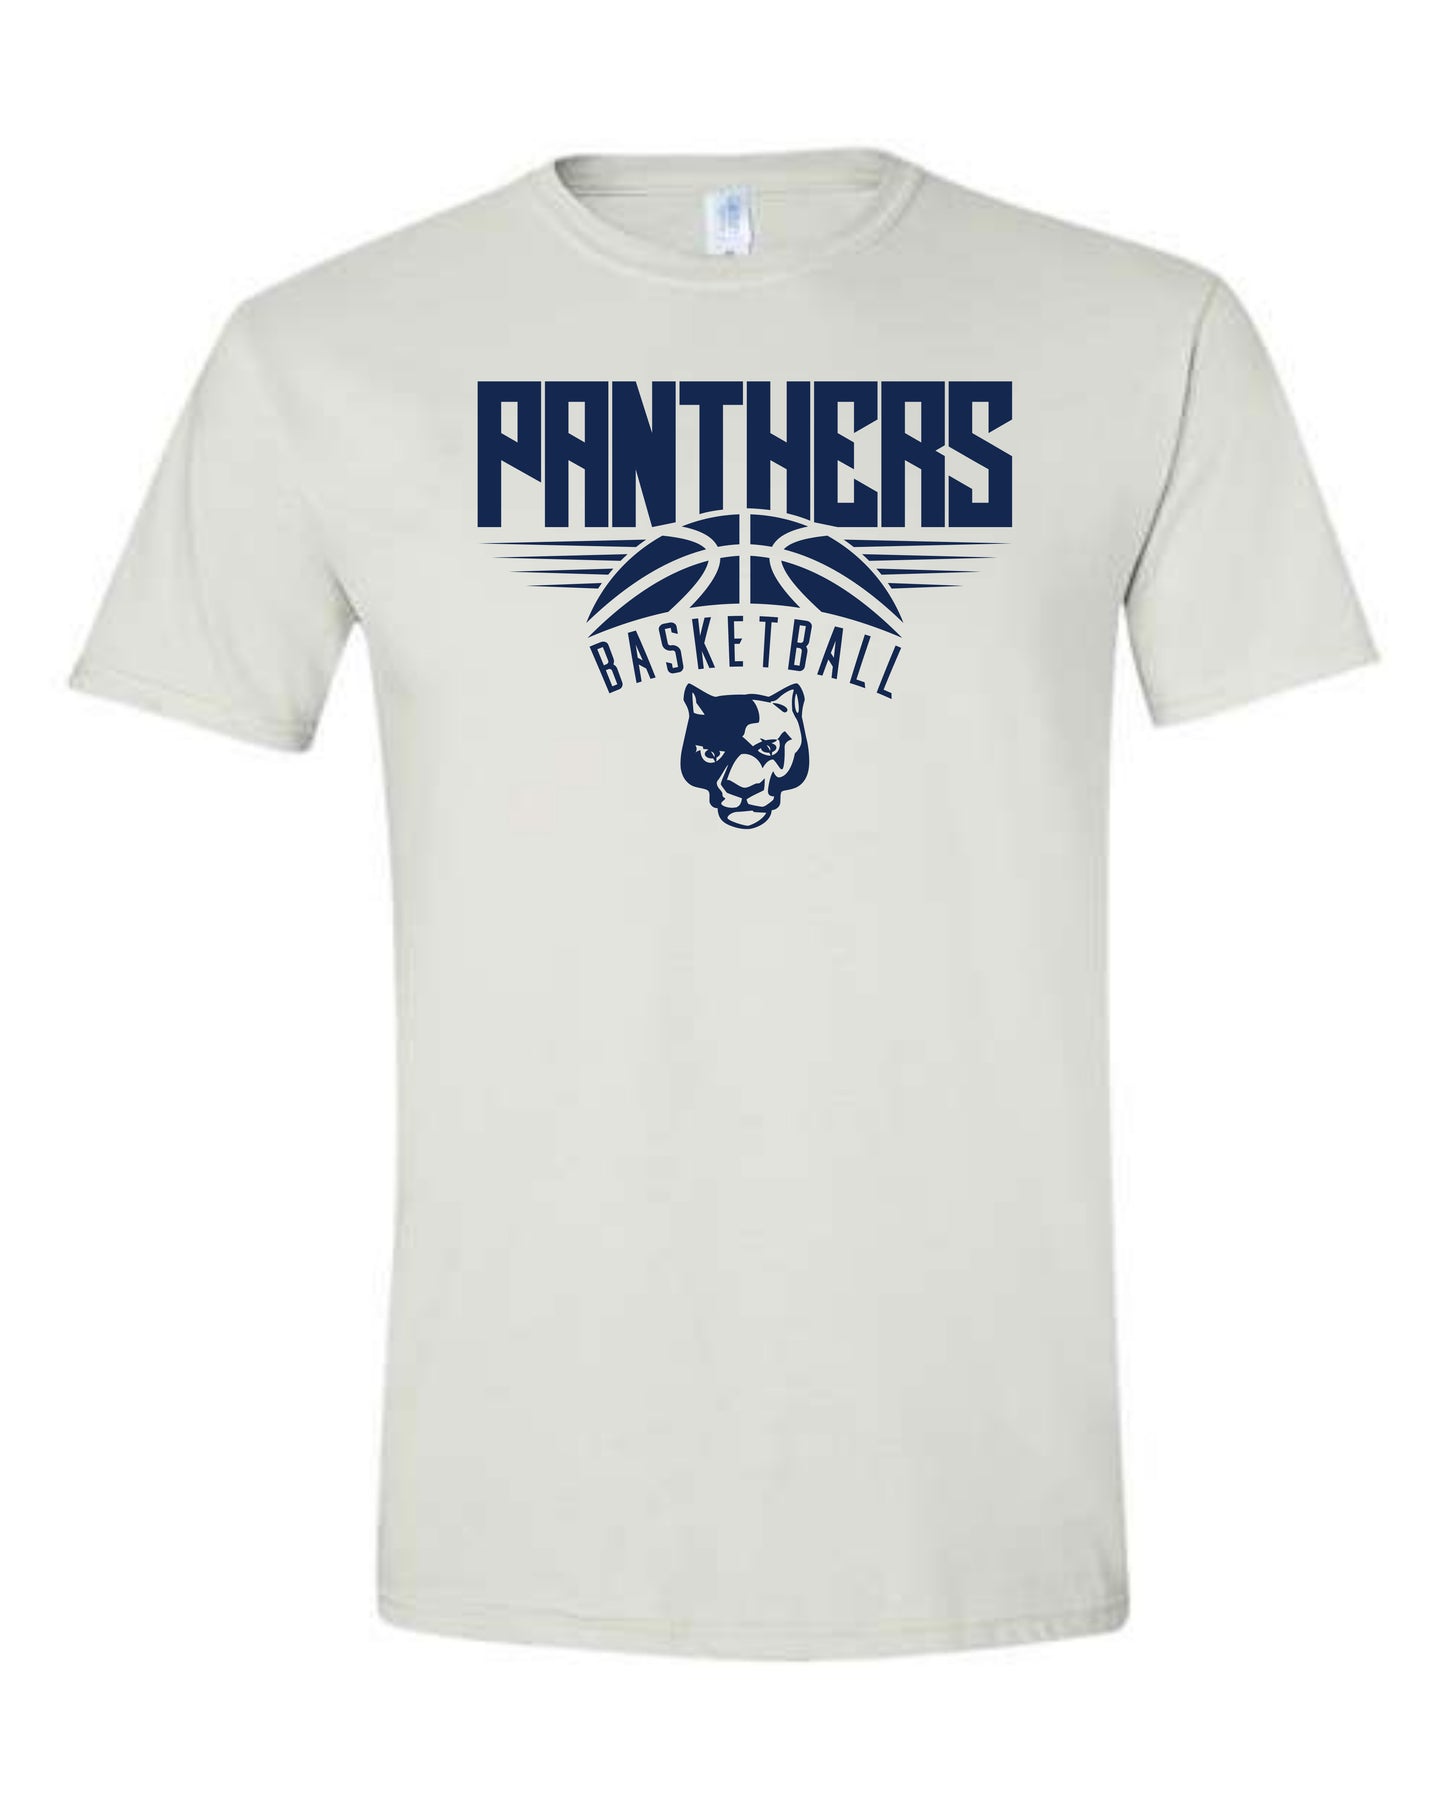 Panthers Basketball - Youth Tee